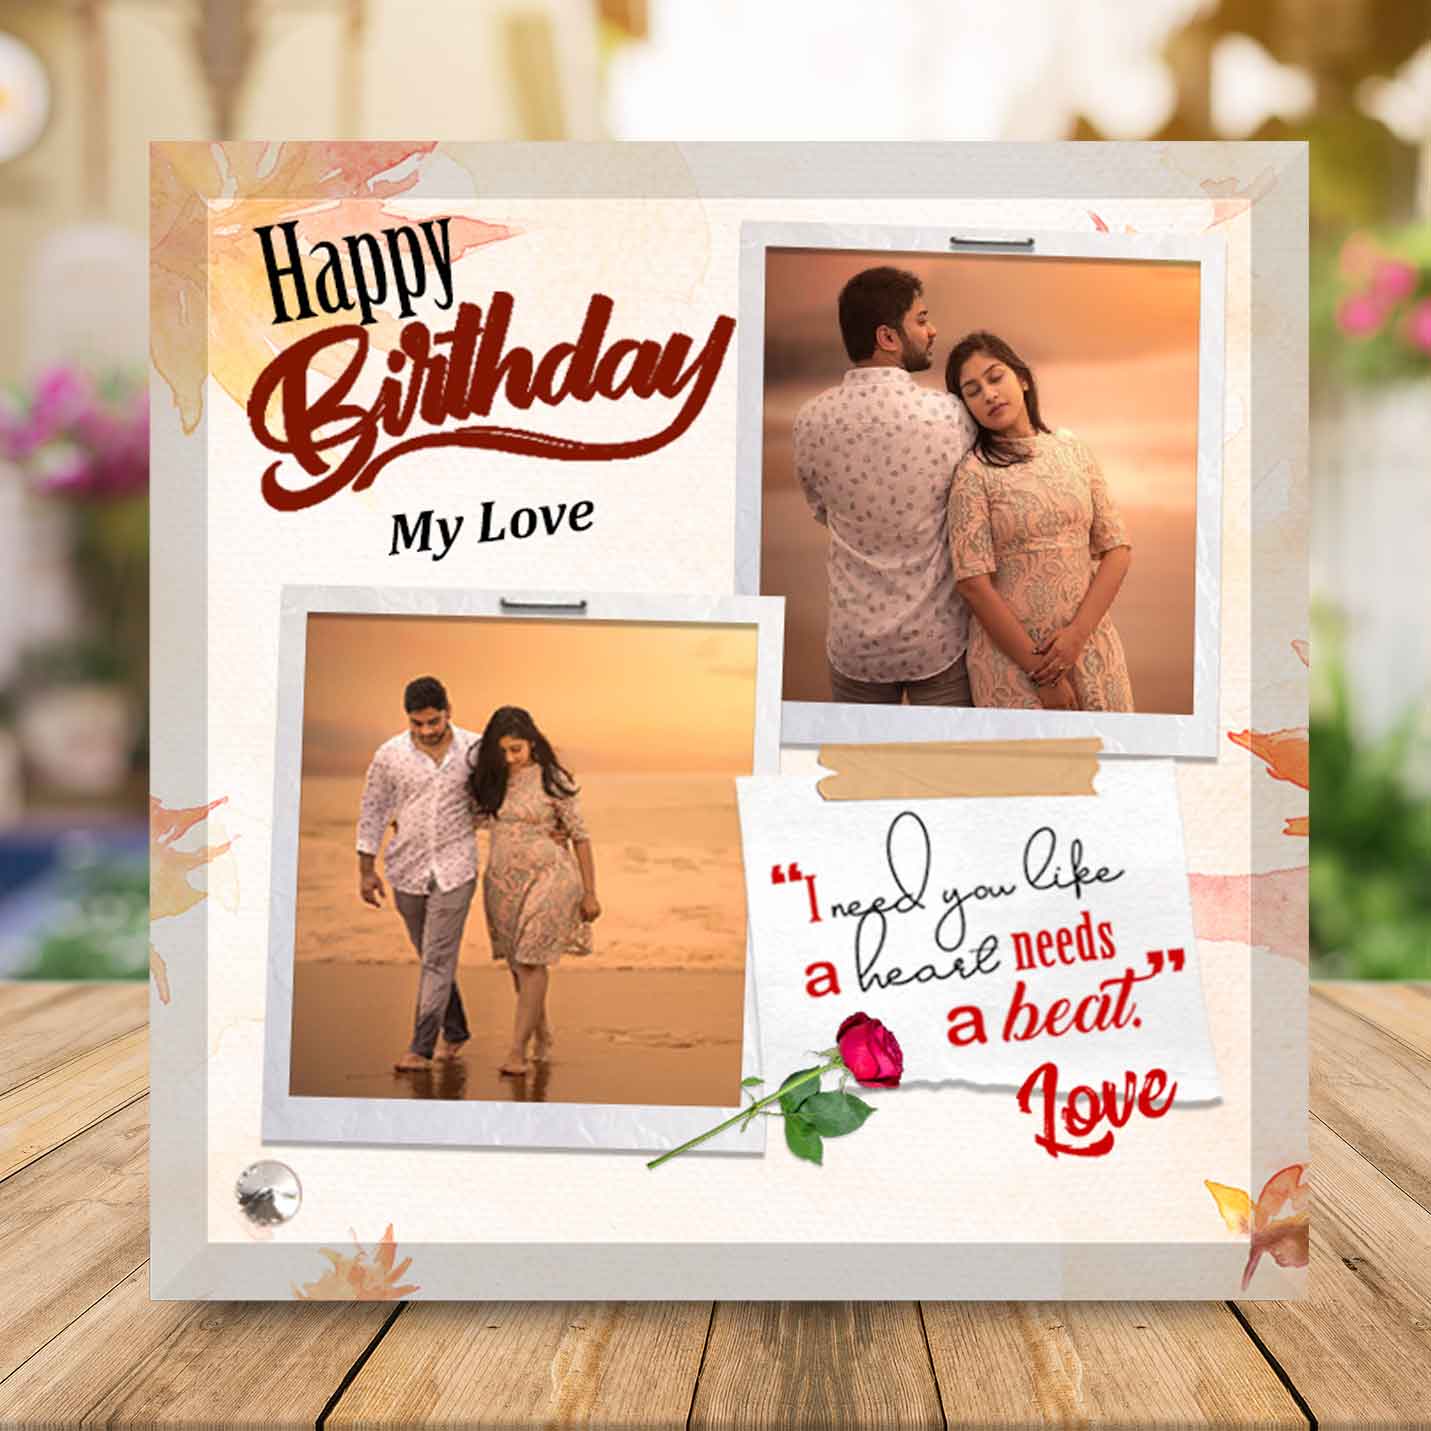 Amazon.com: Dem Canvas Custom Canvas Prints Love Gifts Birthday Gift For Husband  Customized Gifts For Men Romantic Gifts For Him Newly Wed Gifts For The  Couple Husband Birthday Gift Ideas (18x12): Posters